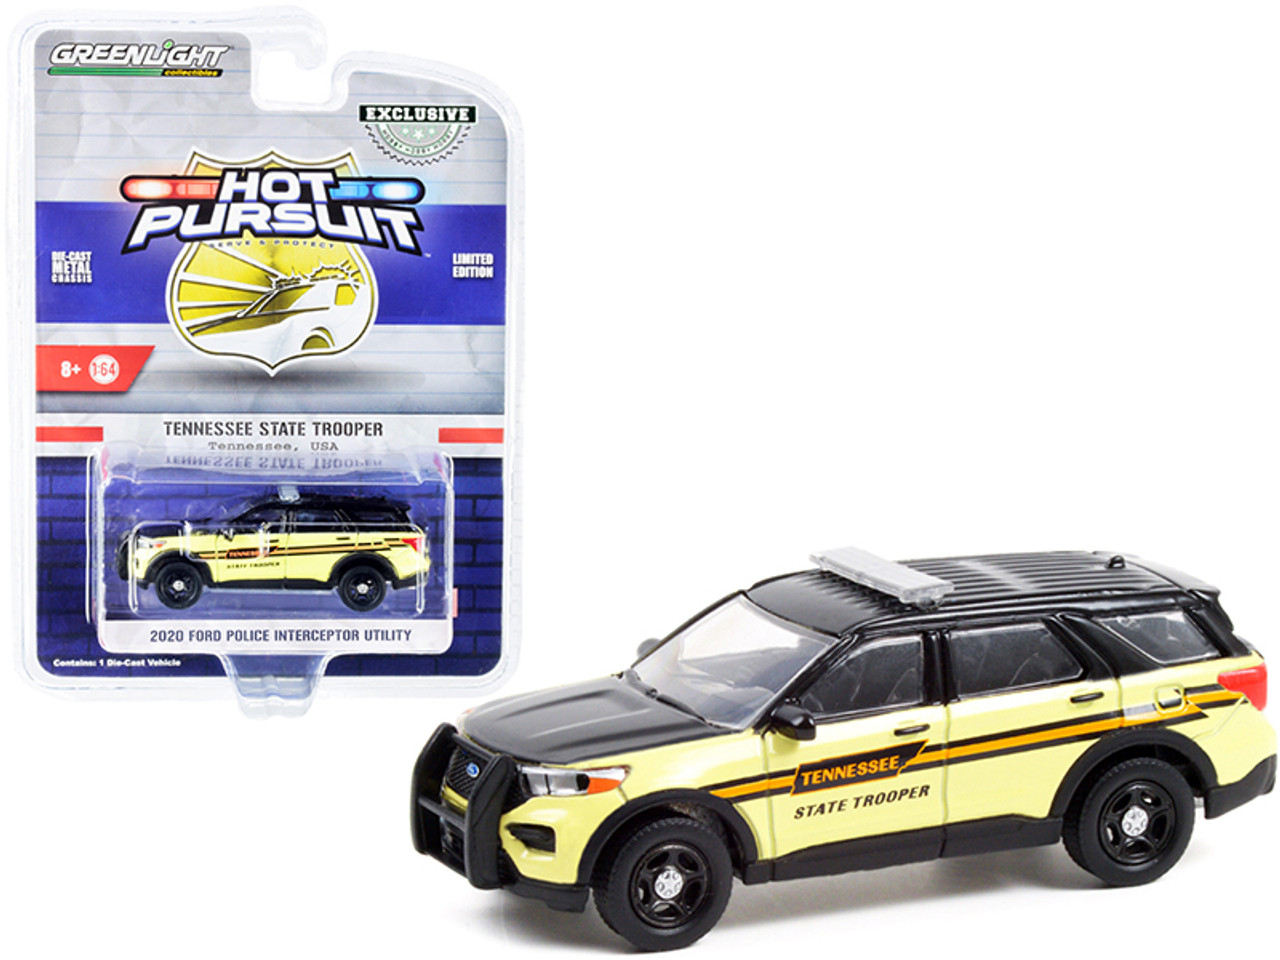 2020 Ford Police Interceptor Utility Yellow and Black "Tennessee State Trooper" "Hot Pursuit" Series 1/64 Diecast Model Car by Greenlight